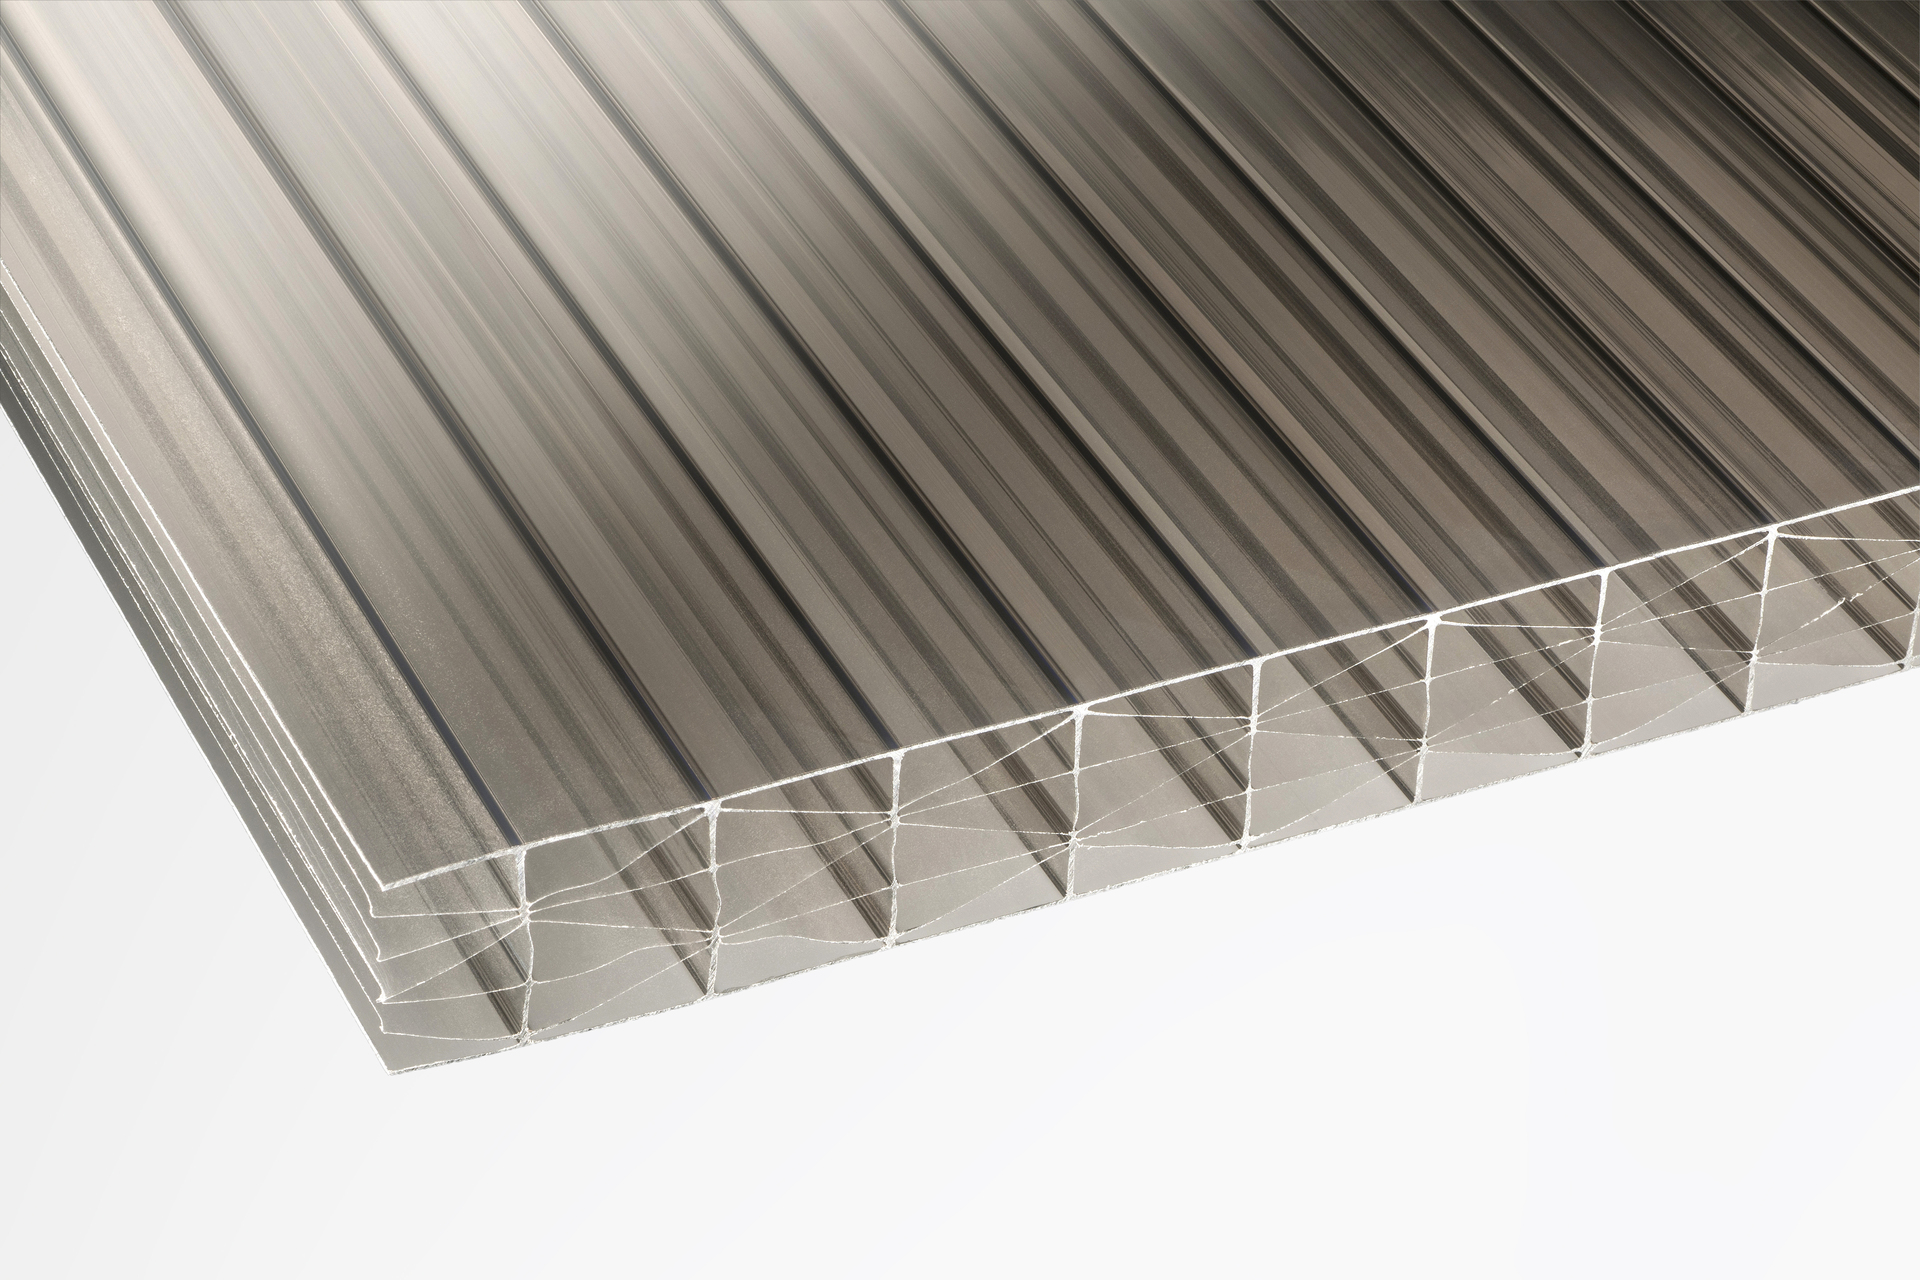 Image of 25mm Bronze Multiwall Polycarbonate Sheet - 4000 x 2100mm